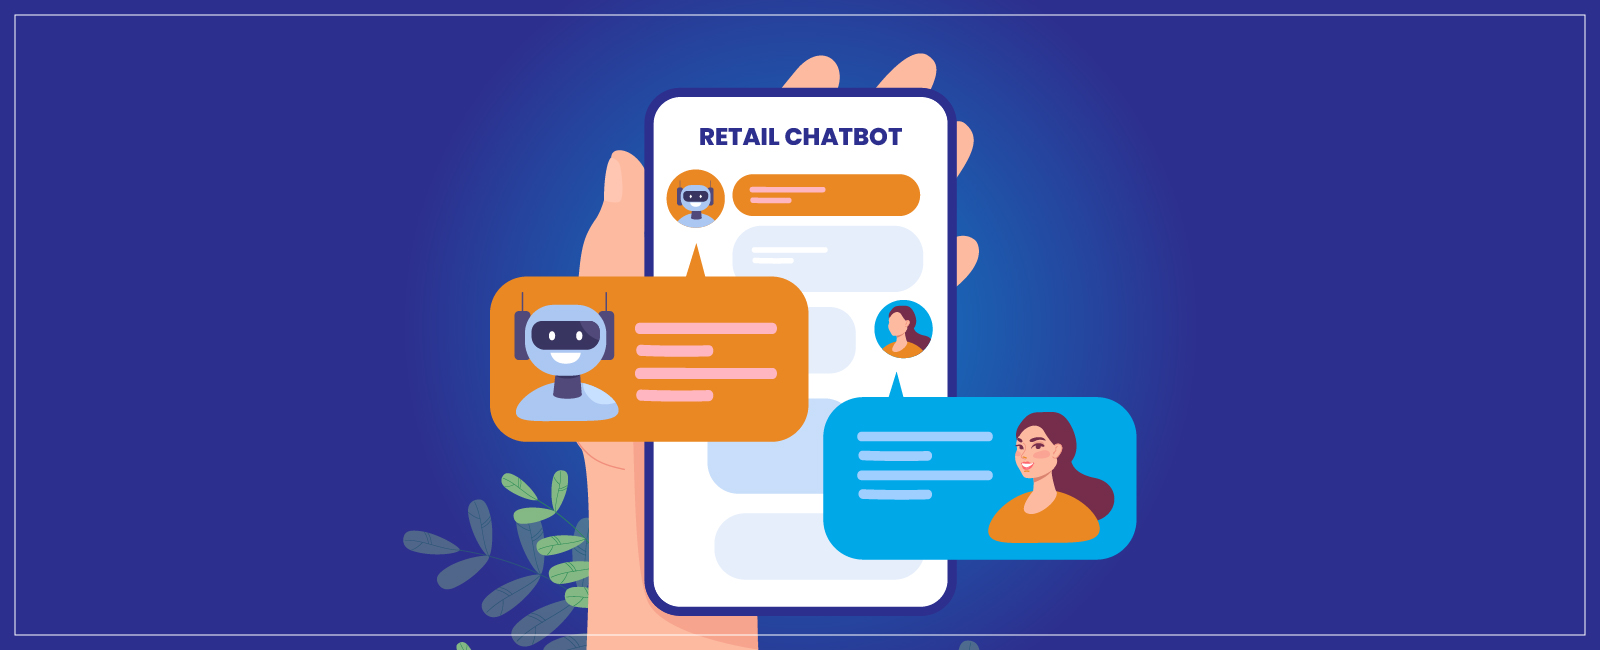 Top 5 Retail Chatbot Use Cases You Can’t Ignore